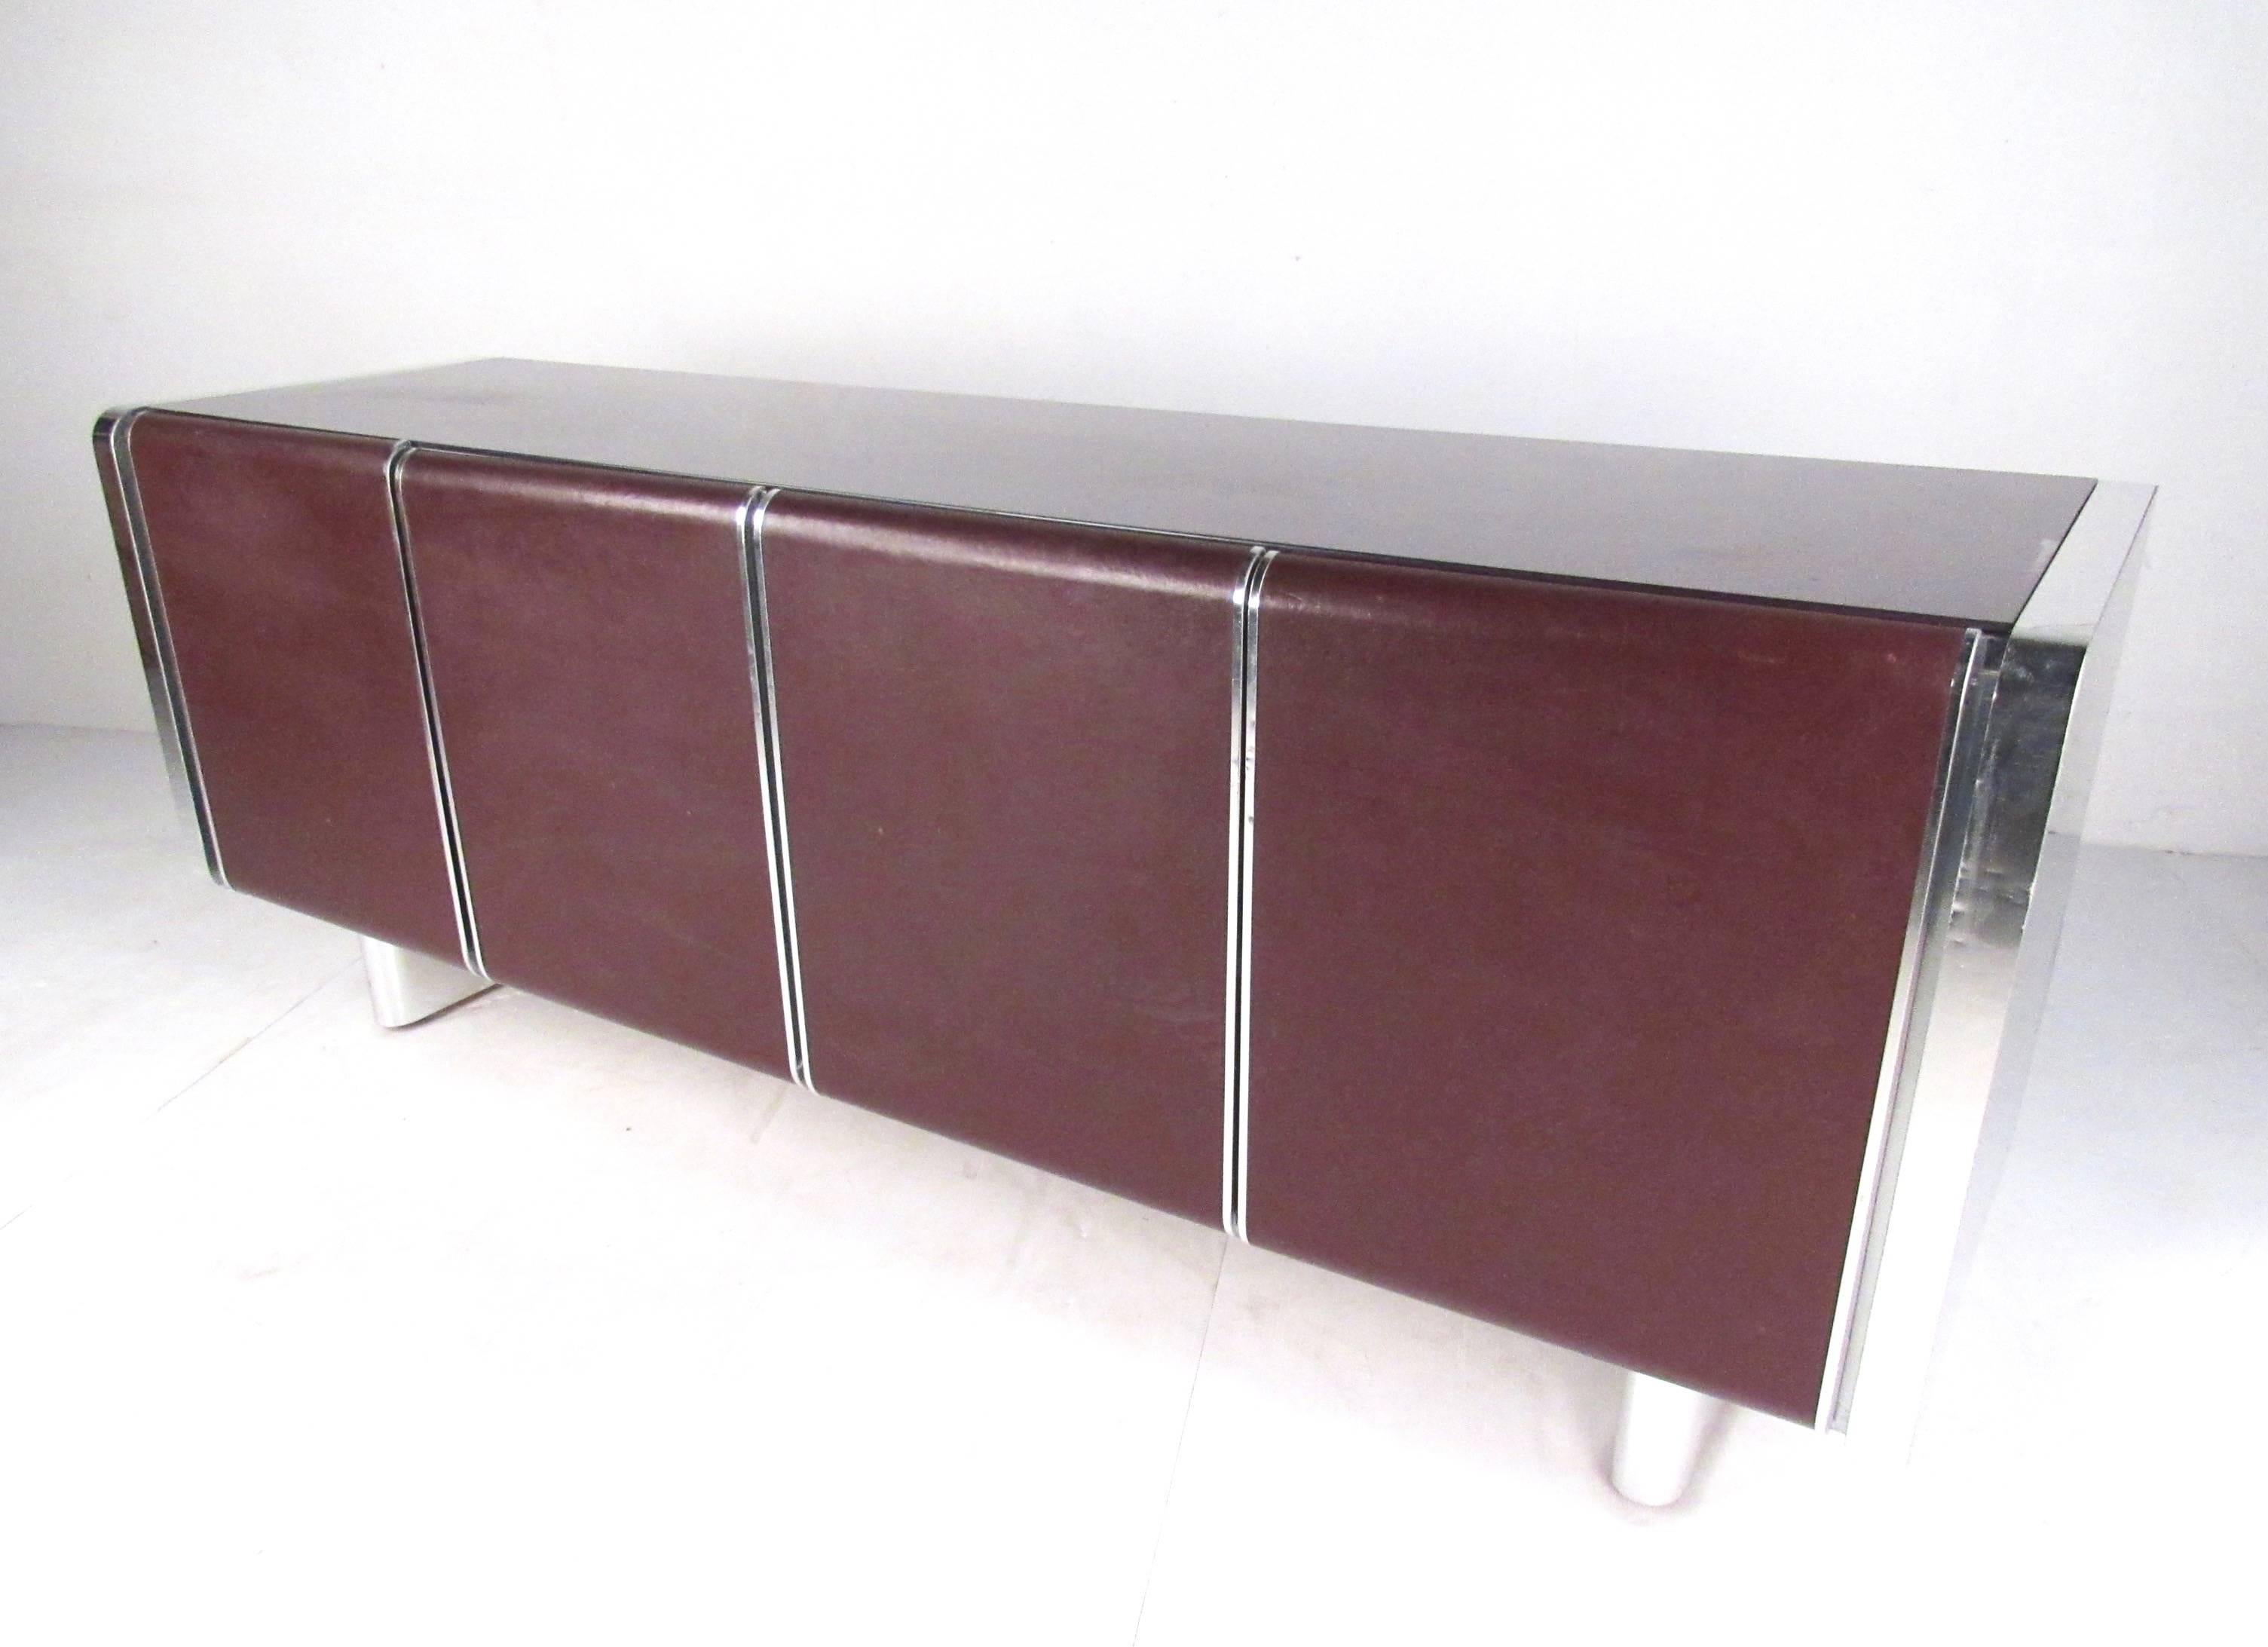 This retro modern sideboard features midcentury style including chrome casing, leather door fronts, and glass top. Spacious interior cabinets allow for adjustable shelves and versatile storage as a living room credenza, dining room sideboard, or